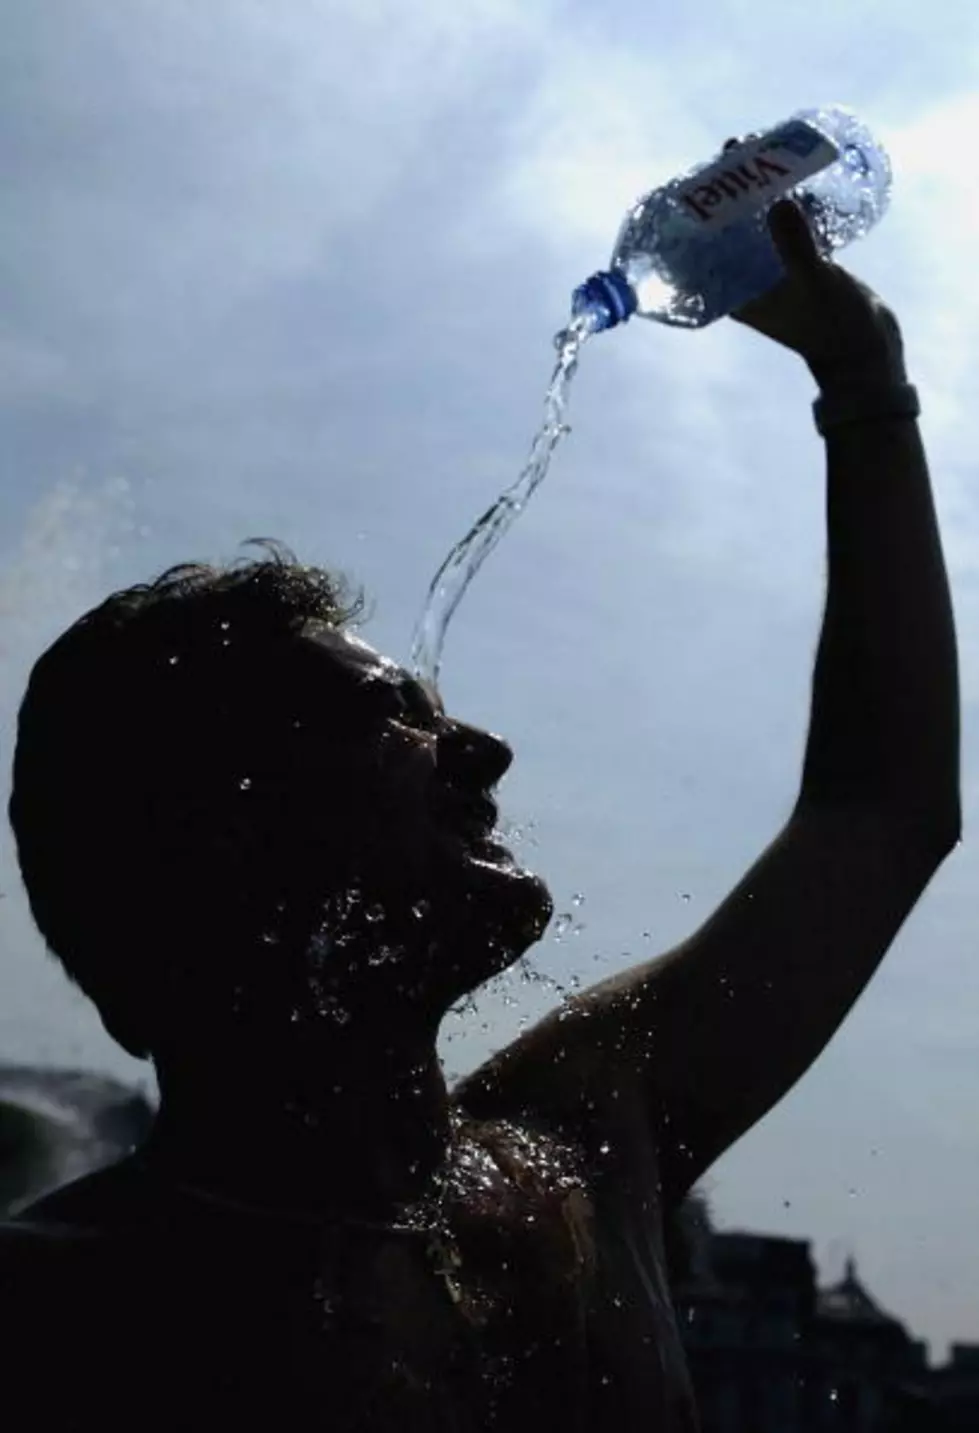 Stay Cool and Beat The Heat With 10 Tips From The CDC